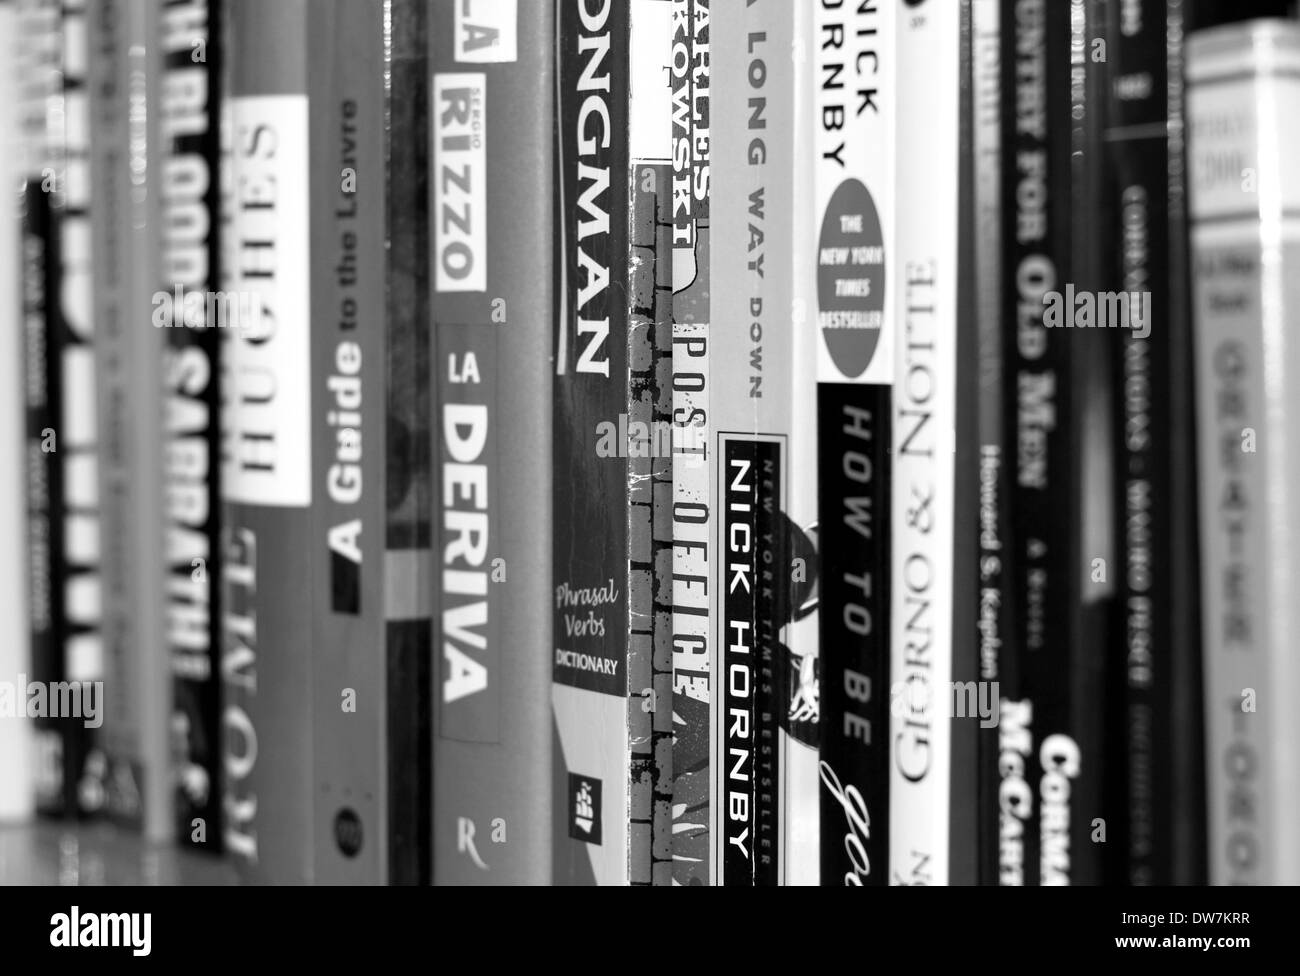 Language books, novels and guides on a shelf in a home in Toronto, Canada Stock Photo